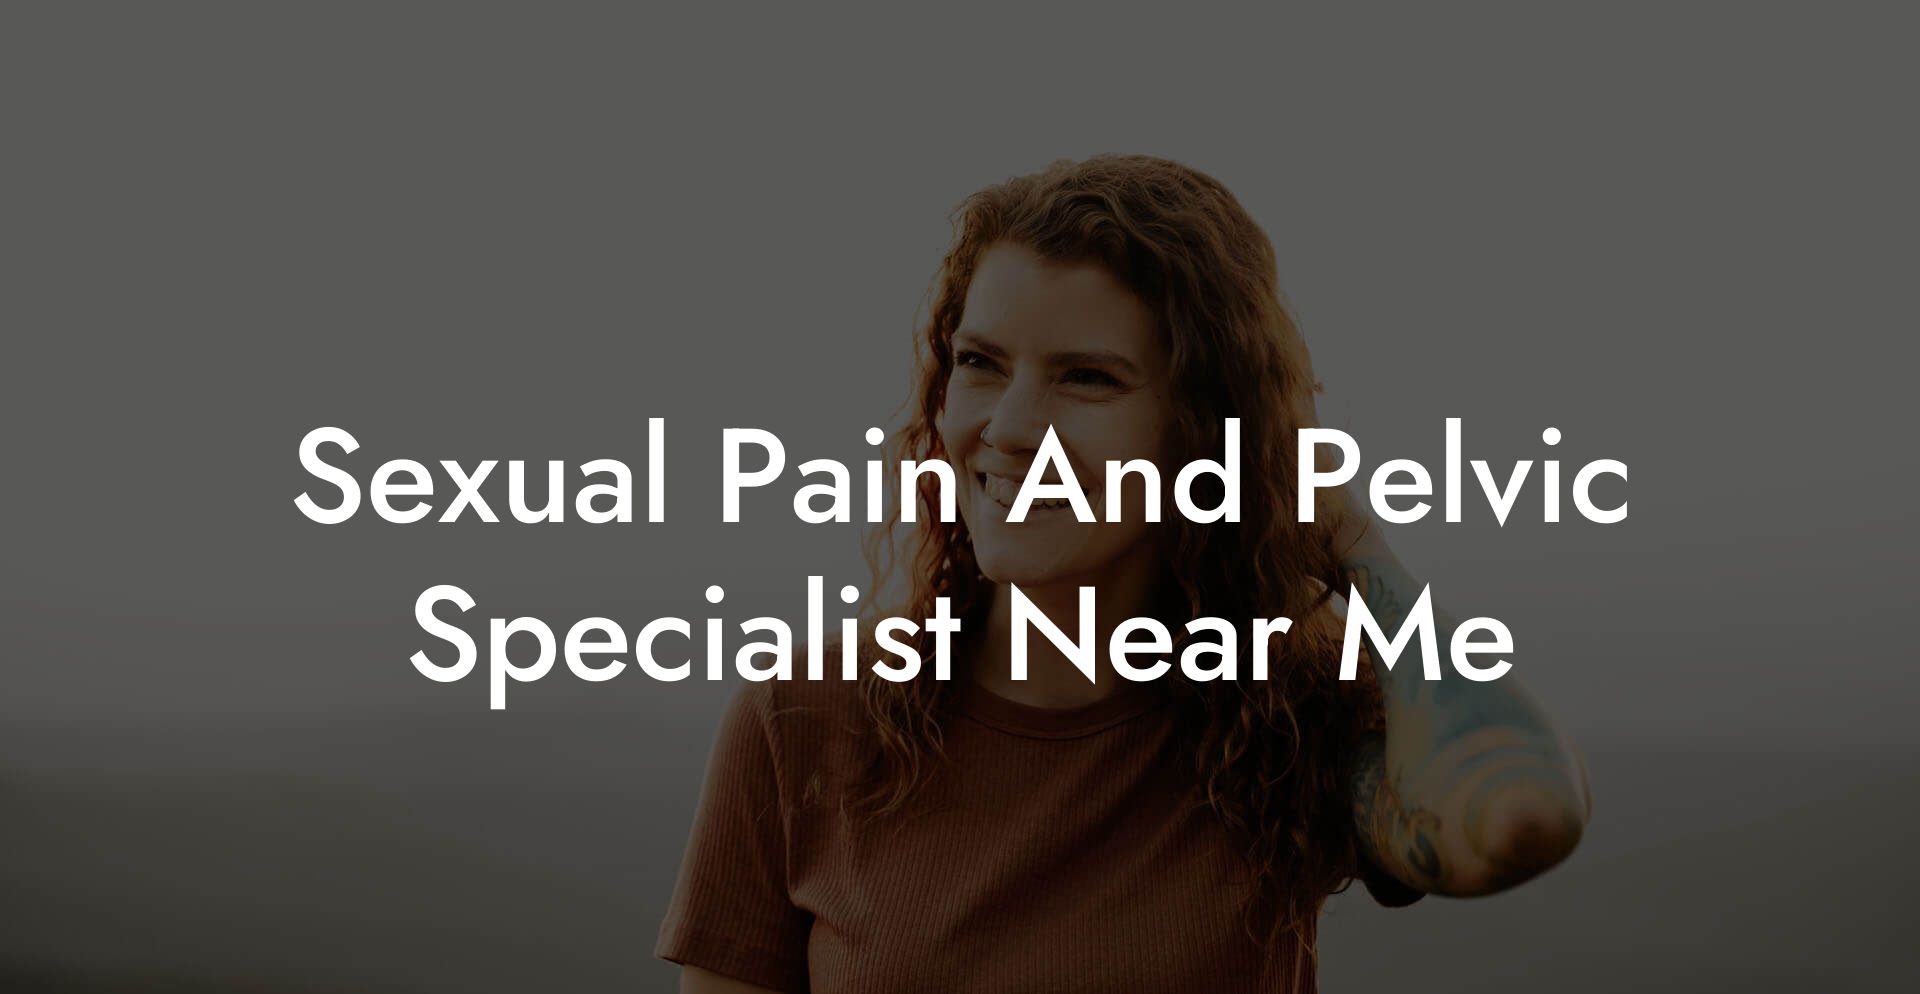 Sexual Pain And Pelvic Specialist Near Me